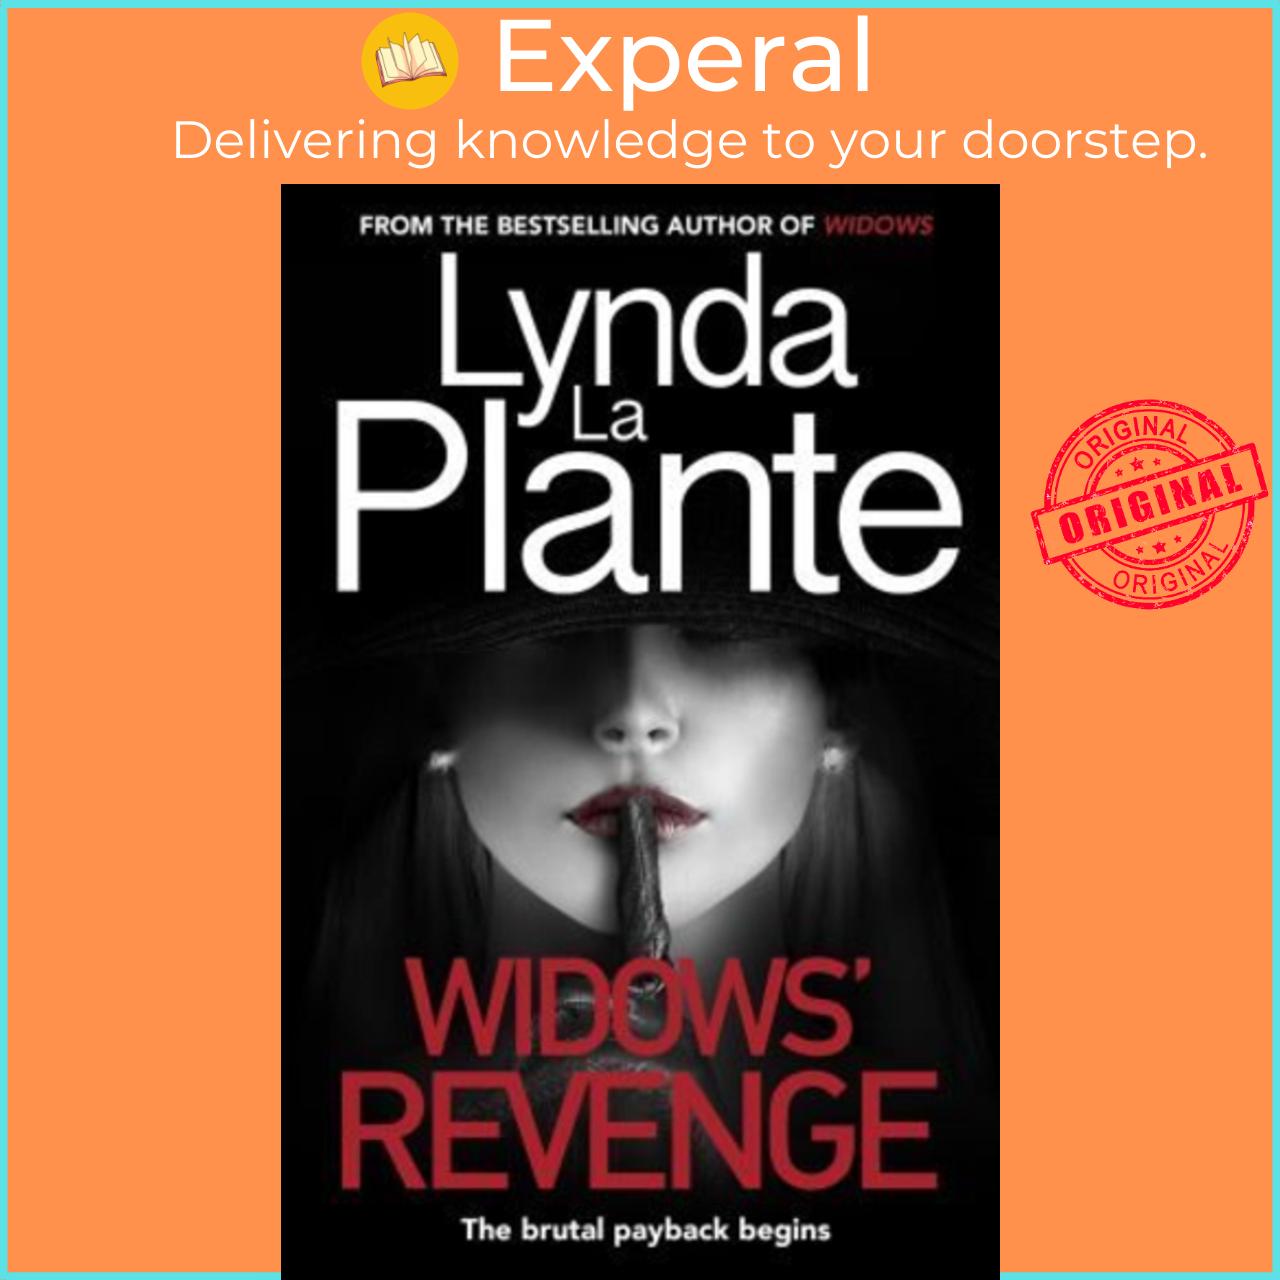 Sách - Widows' Revenge : From the bestselling author of Widows - now a major  by Lynda La Plante (UK edition, paperback)